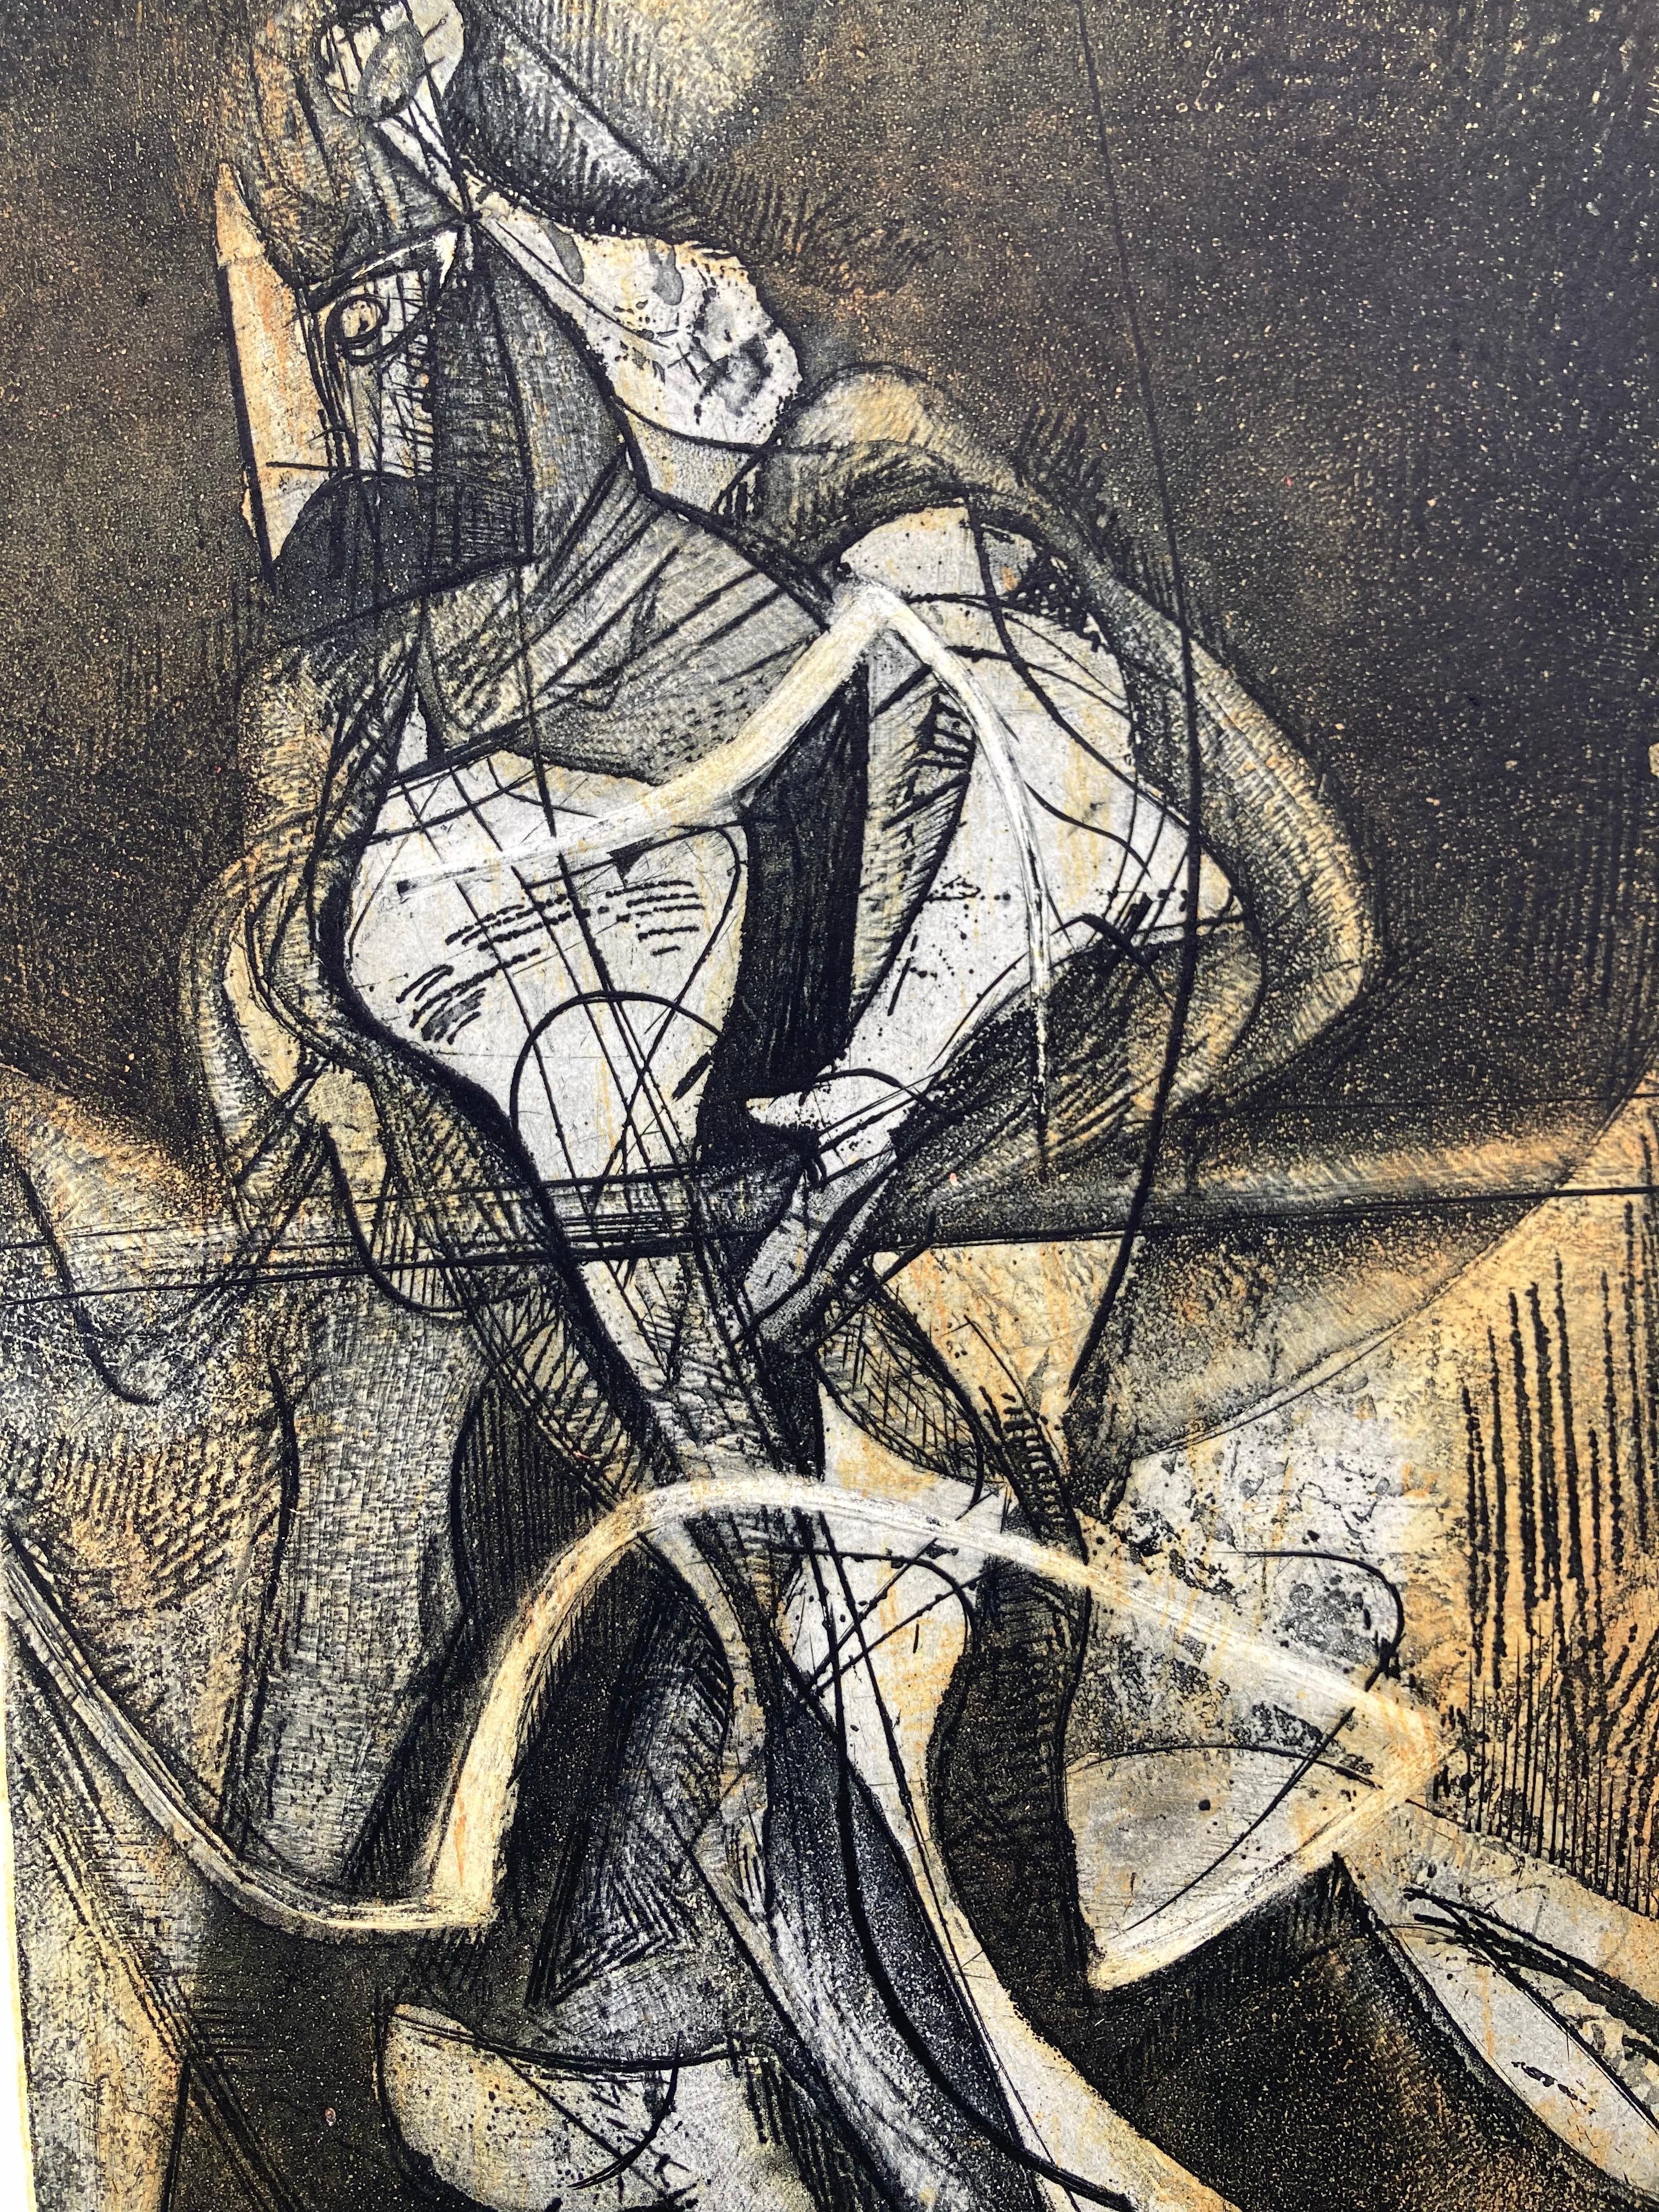 ERNEST FREED (1908 – 1974)

DON QUIXOTE 1956
Color intaglio, Signed, dated and titled in pencil. Image, 14 ¾ x 8 3/4 sheet, 16 1/2 x 10 ¼ inches. In good condition. 

The following is taken from 